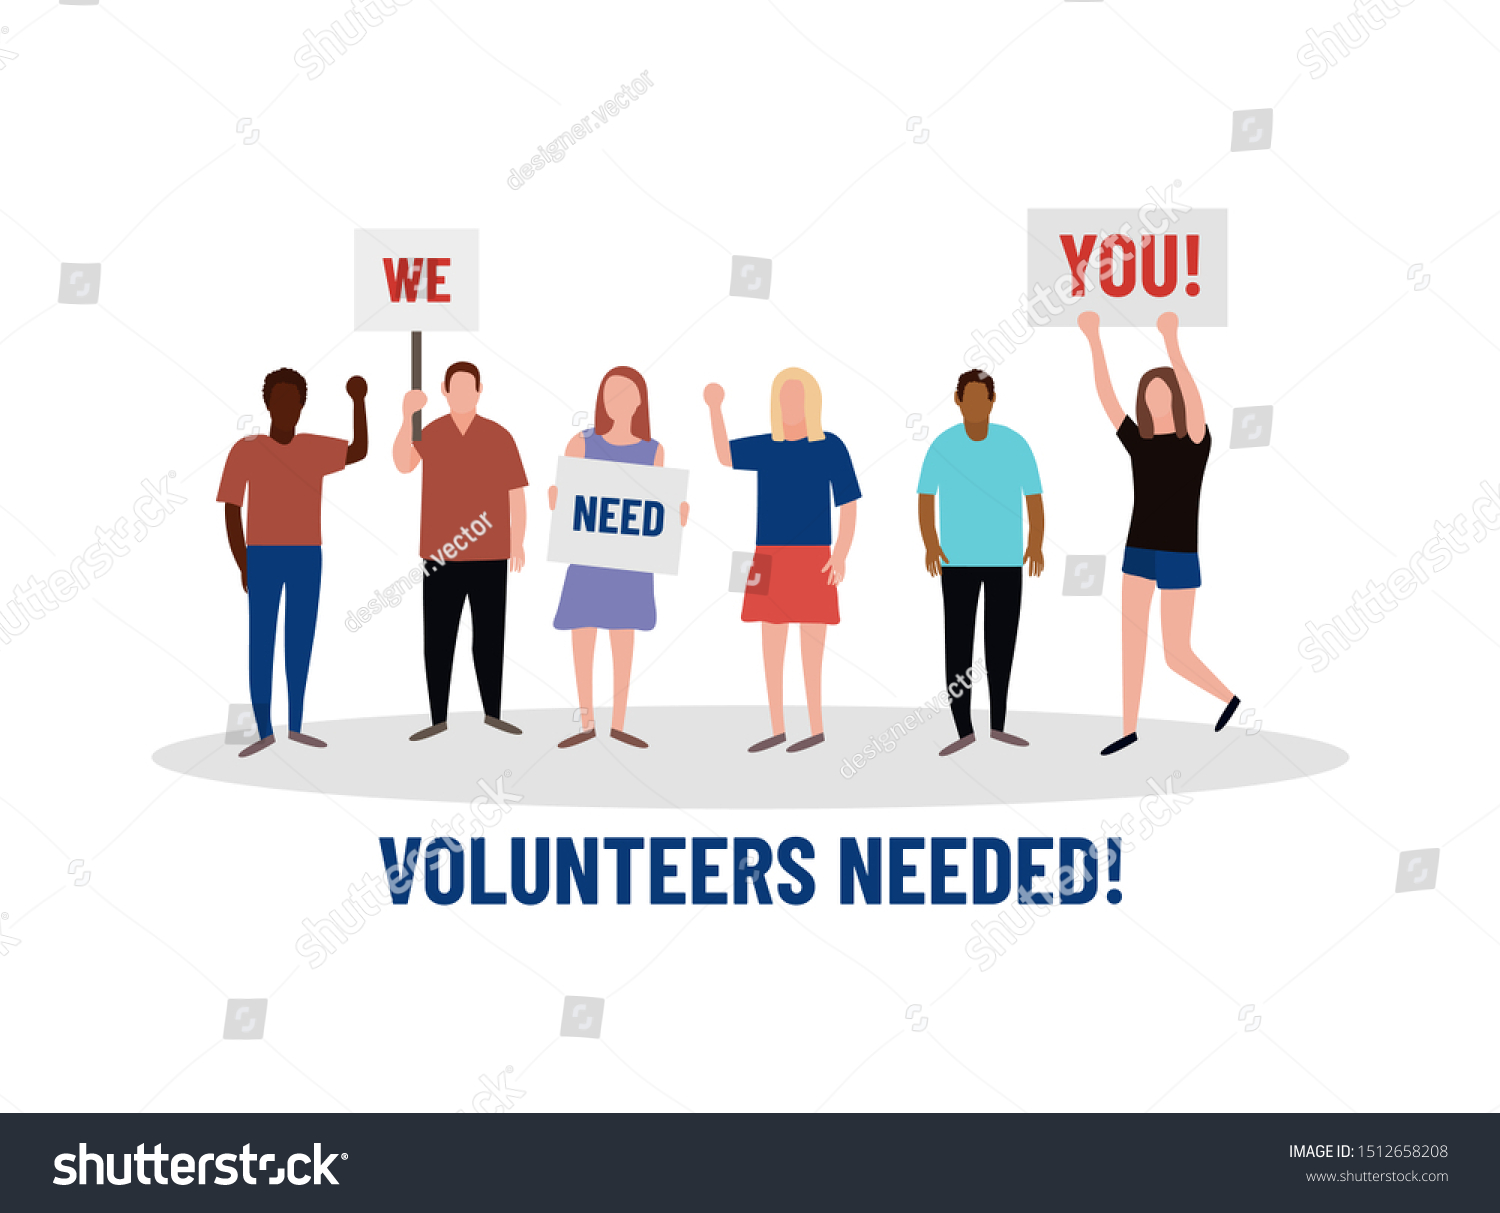 SVG of Volunteers needed illustration with People crowd with banners. We need you! svg